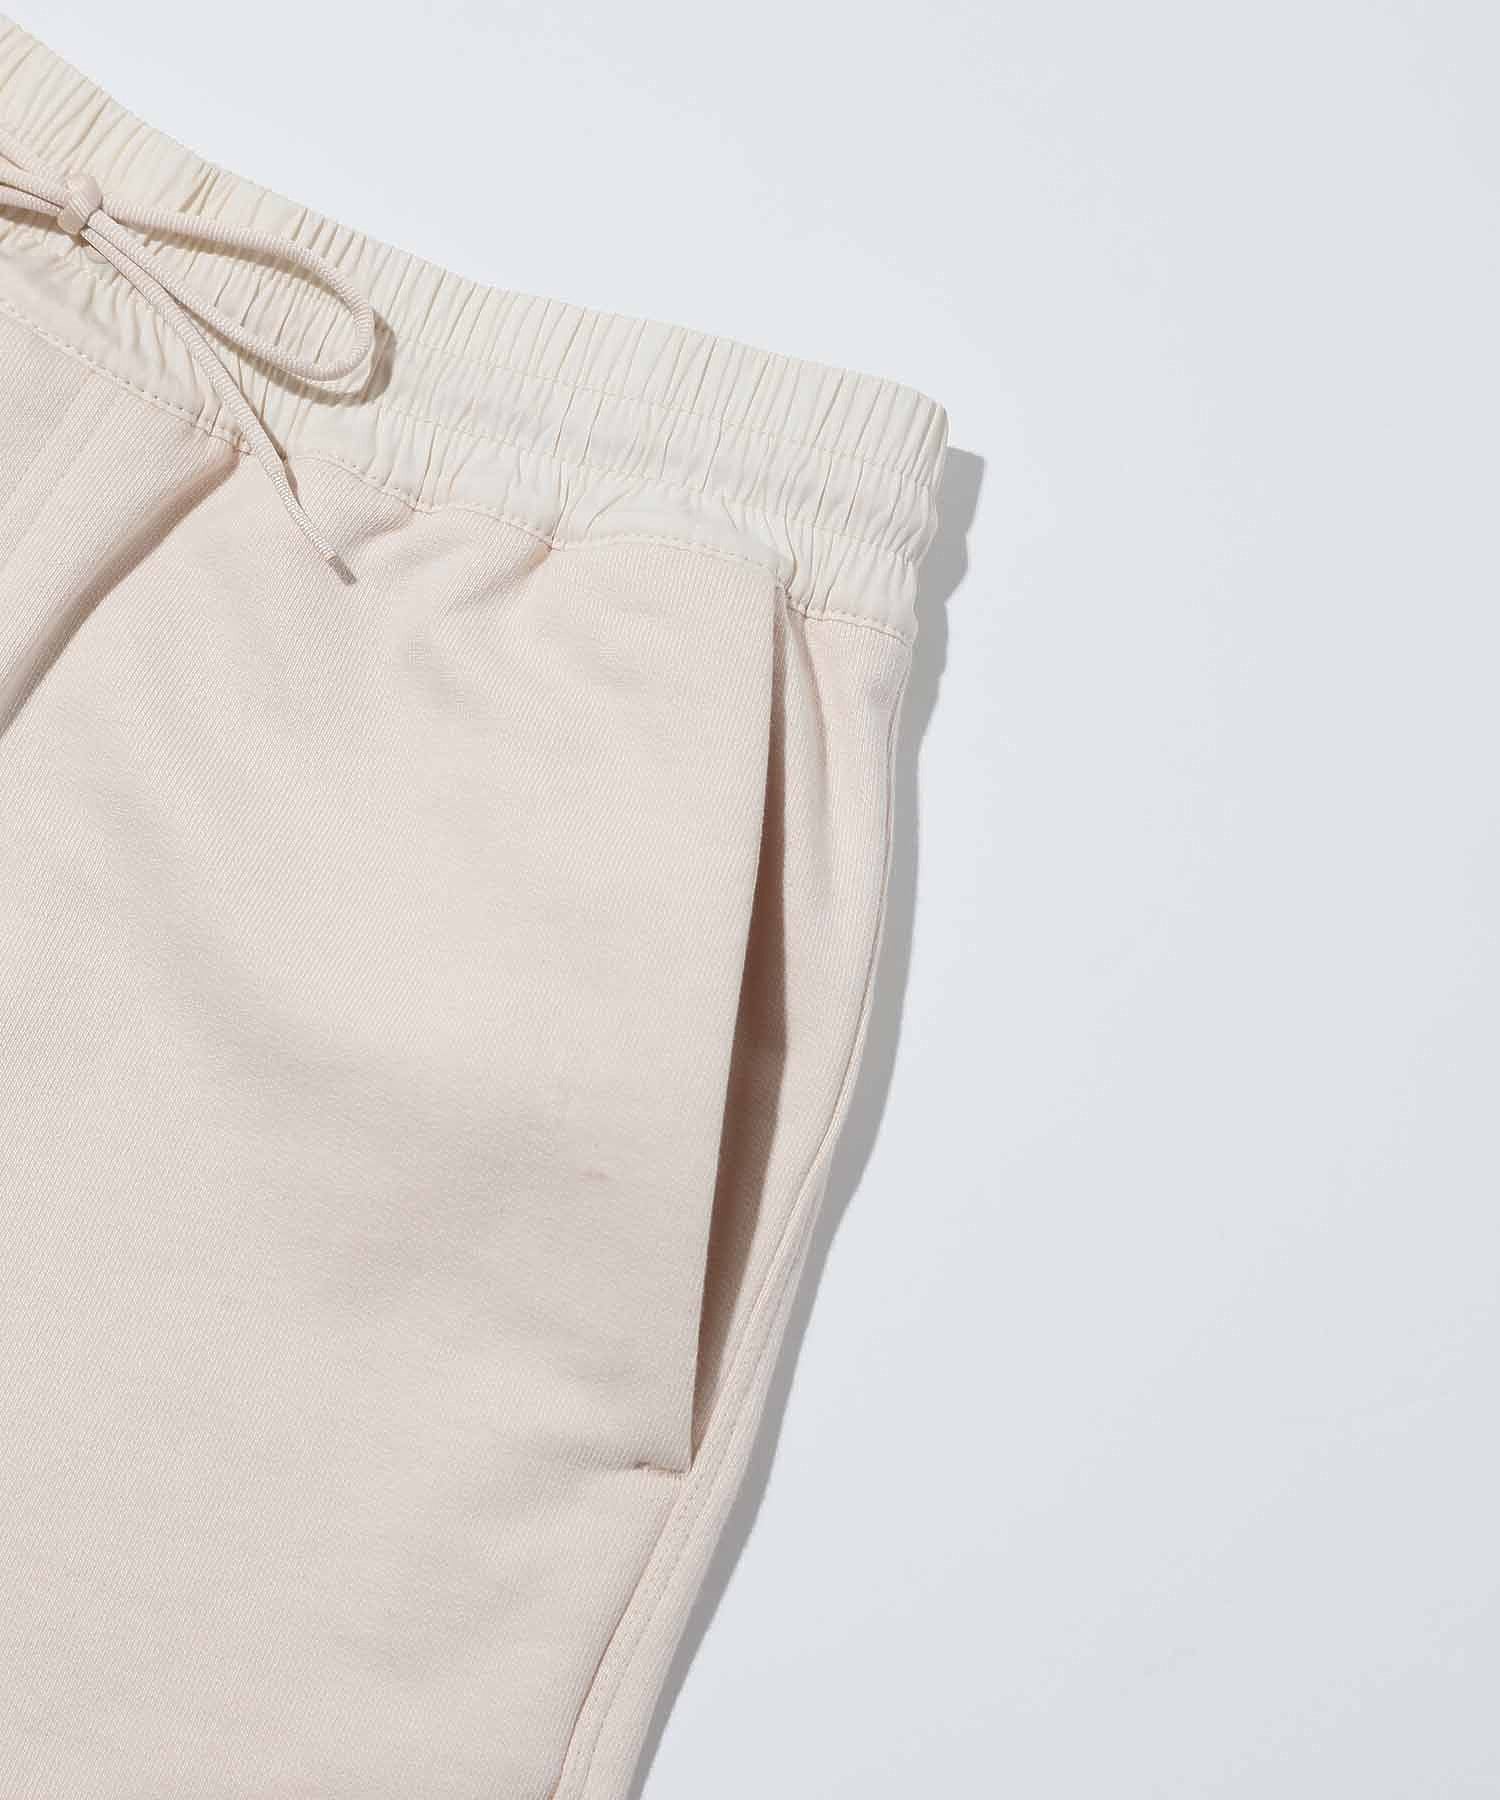 Y-3 /ワイスリー/M CLASSIC TERRY SHORTS HG6207